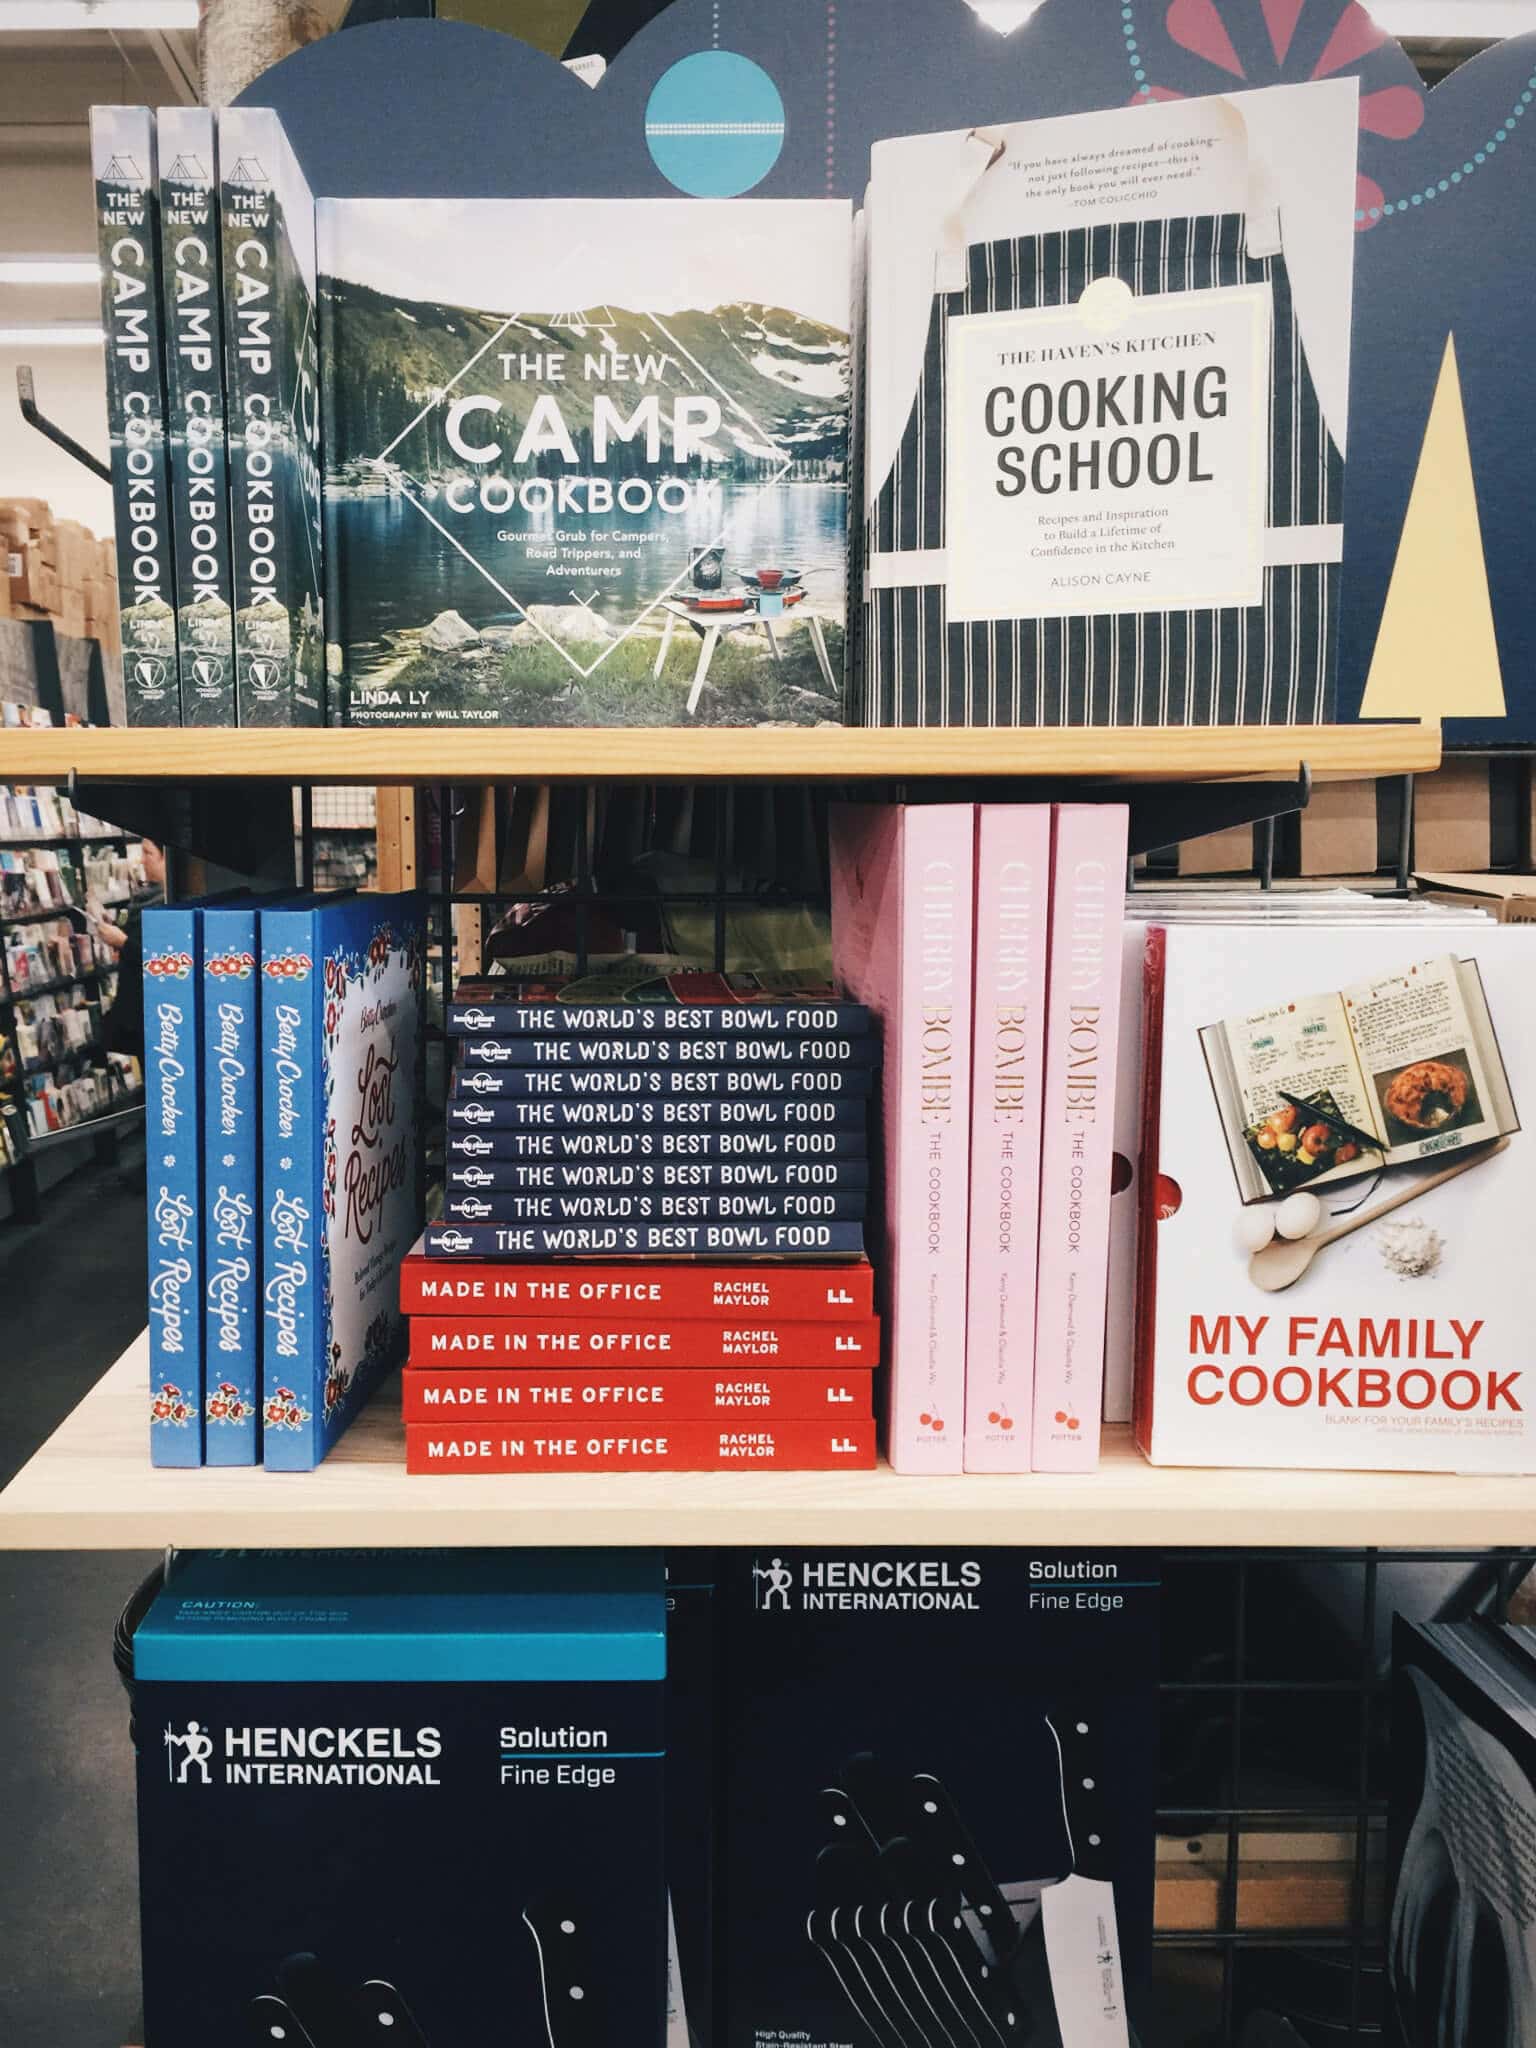 Premium placement of The New Camp Cookbook on store shelves